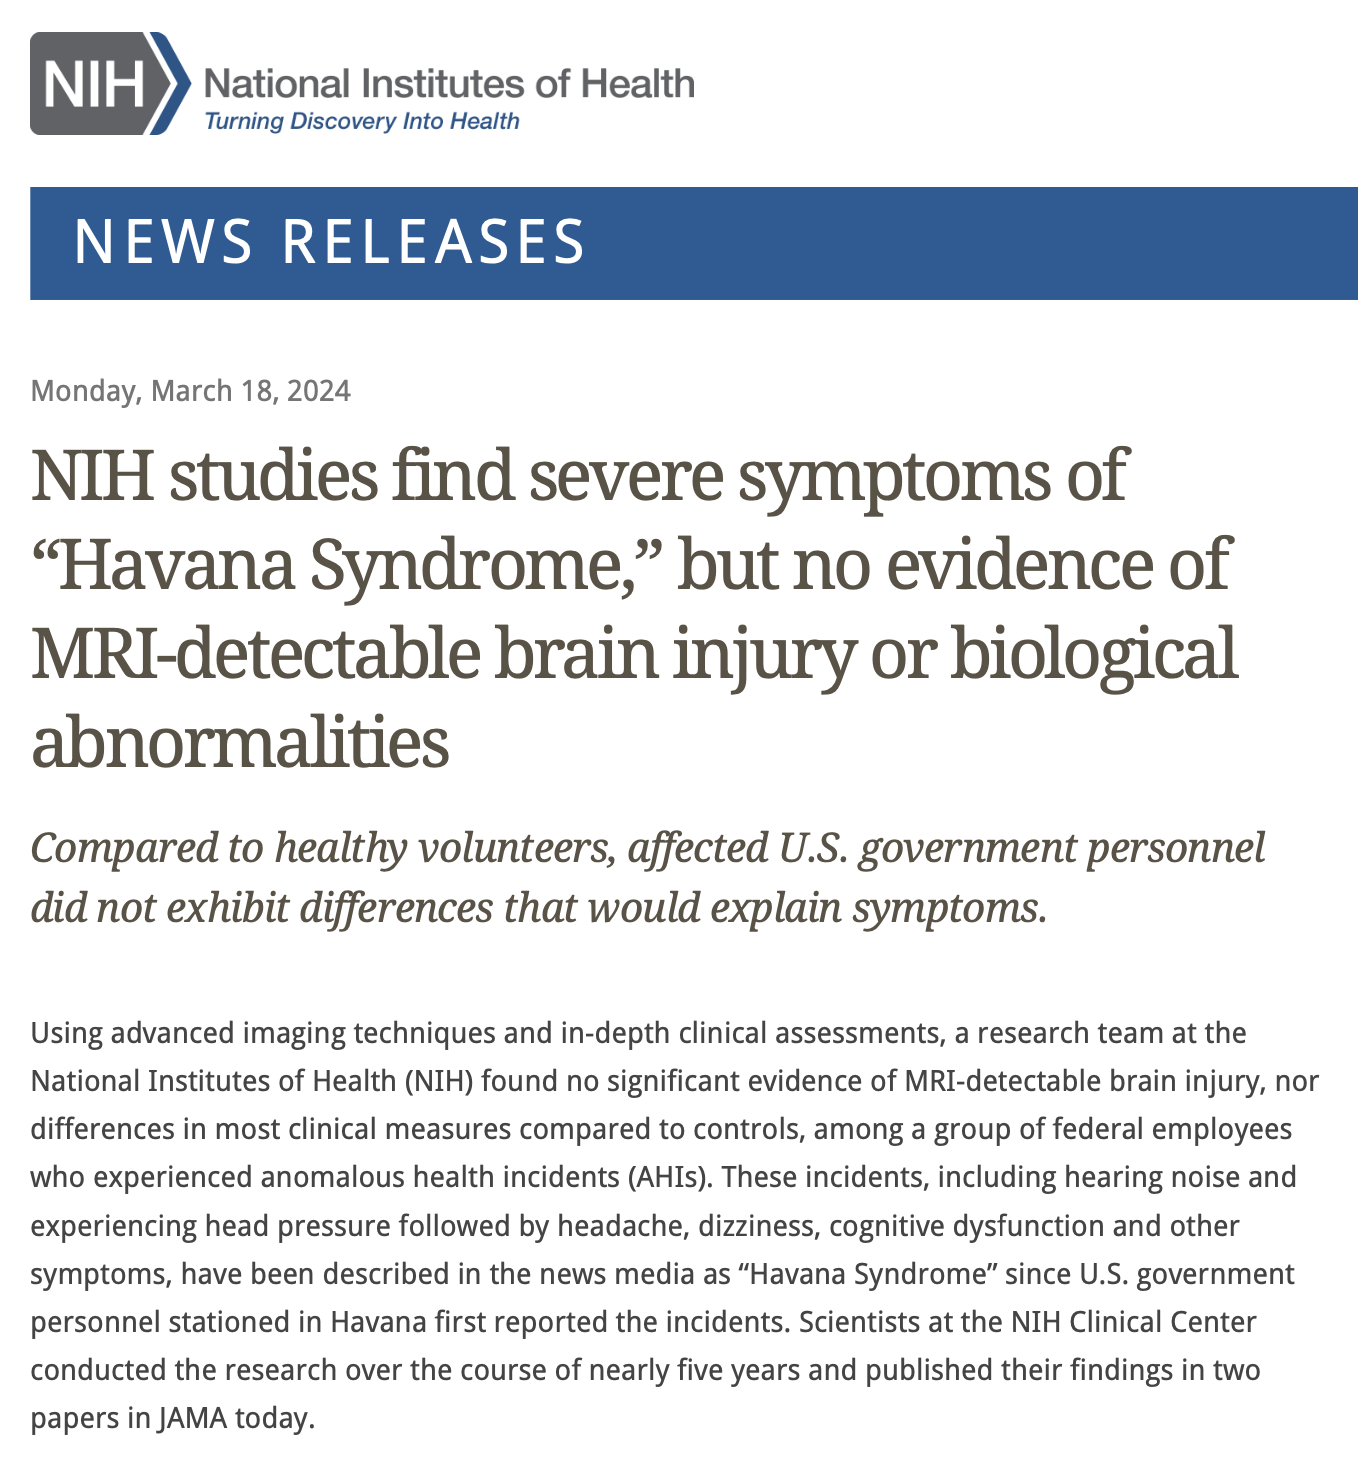 NIH Press Release on JAMA Papers on Havana Syndrome